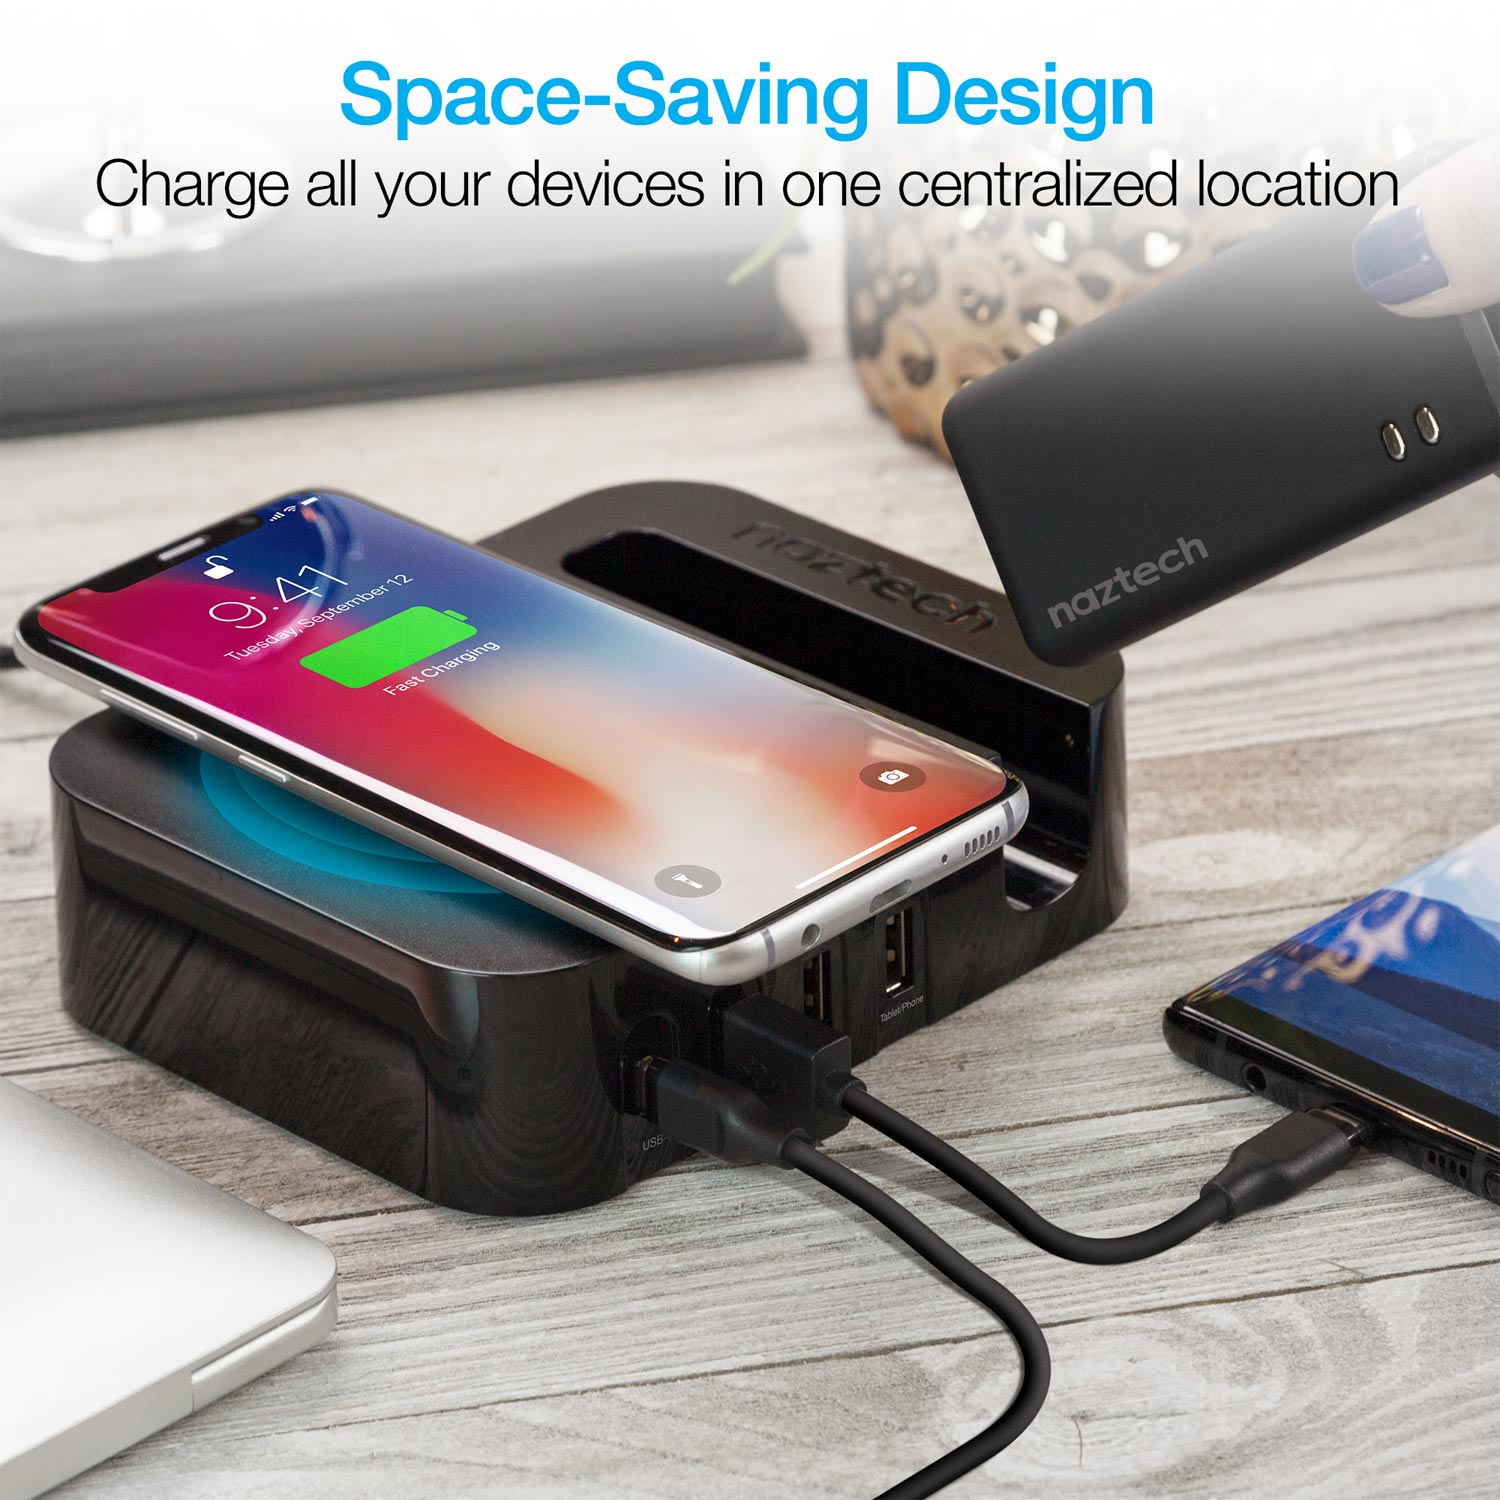 Ultimate Power Station Power Bank